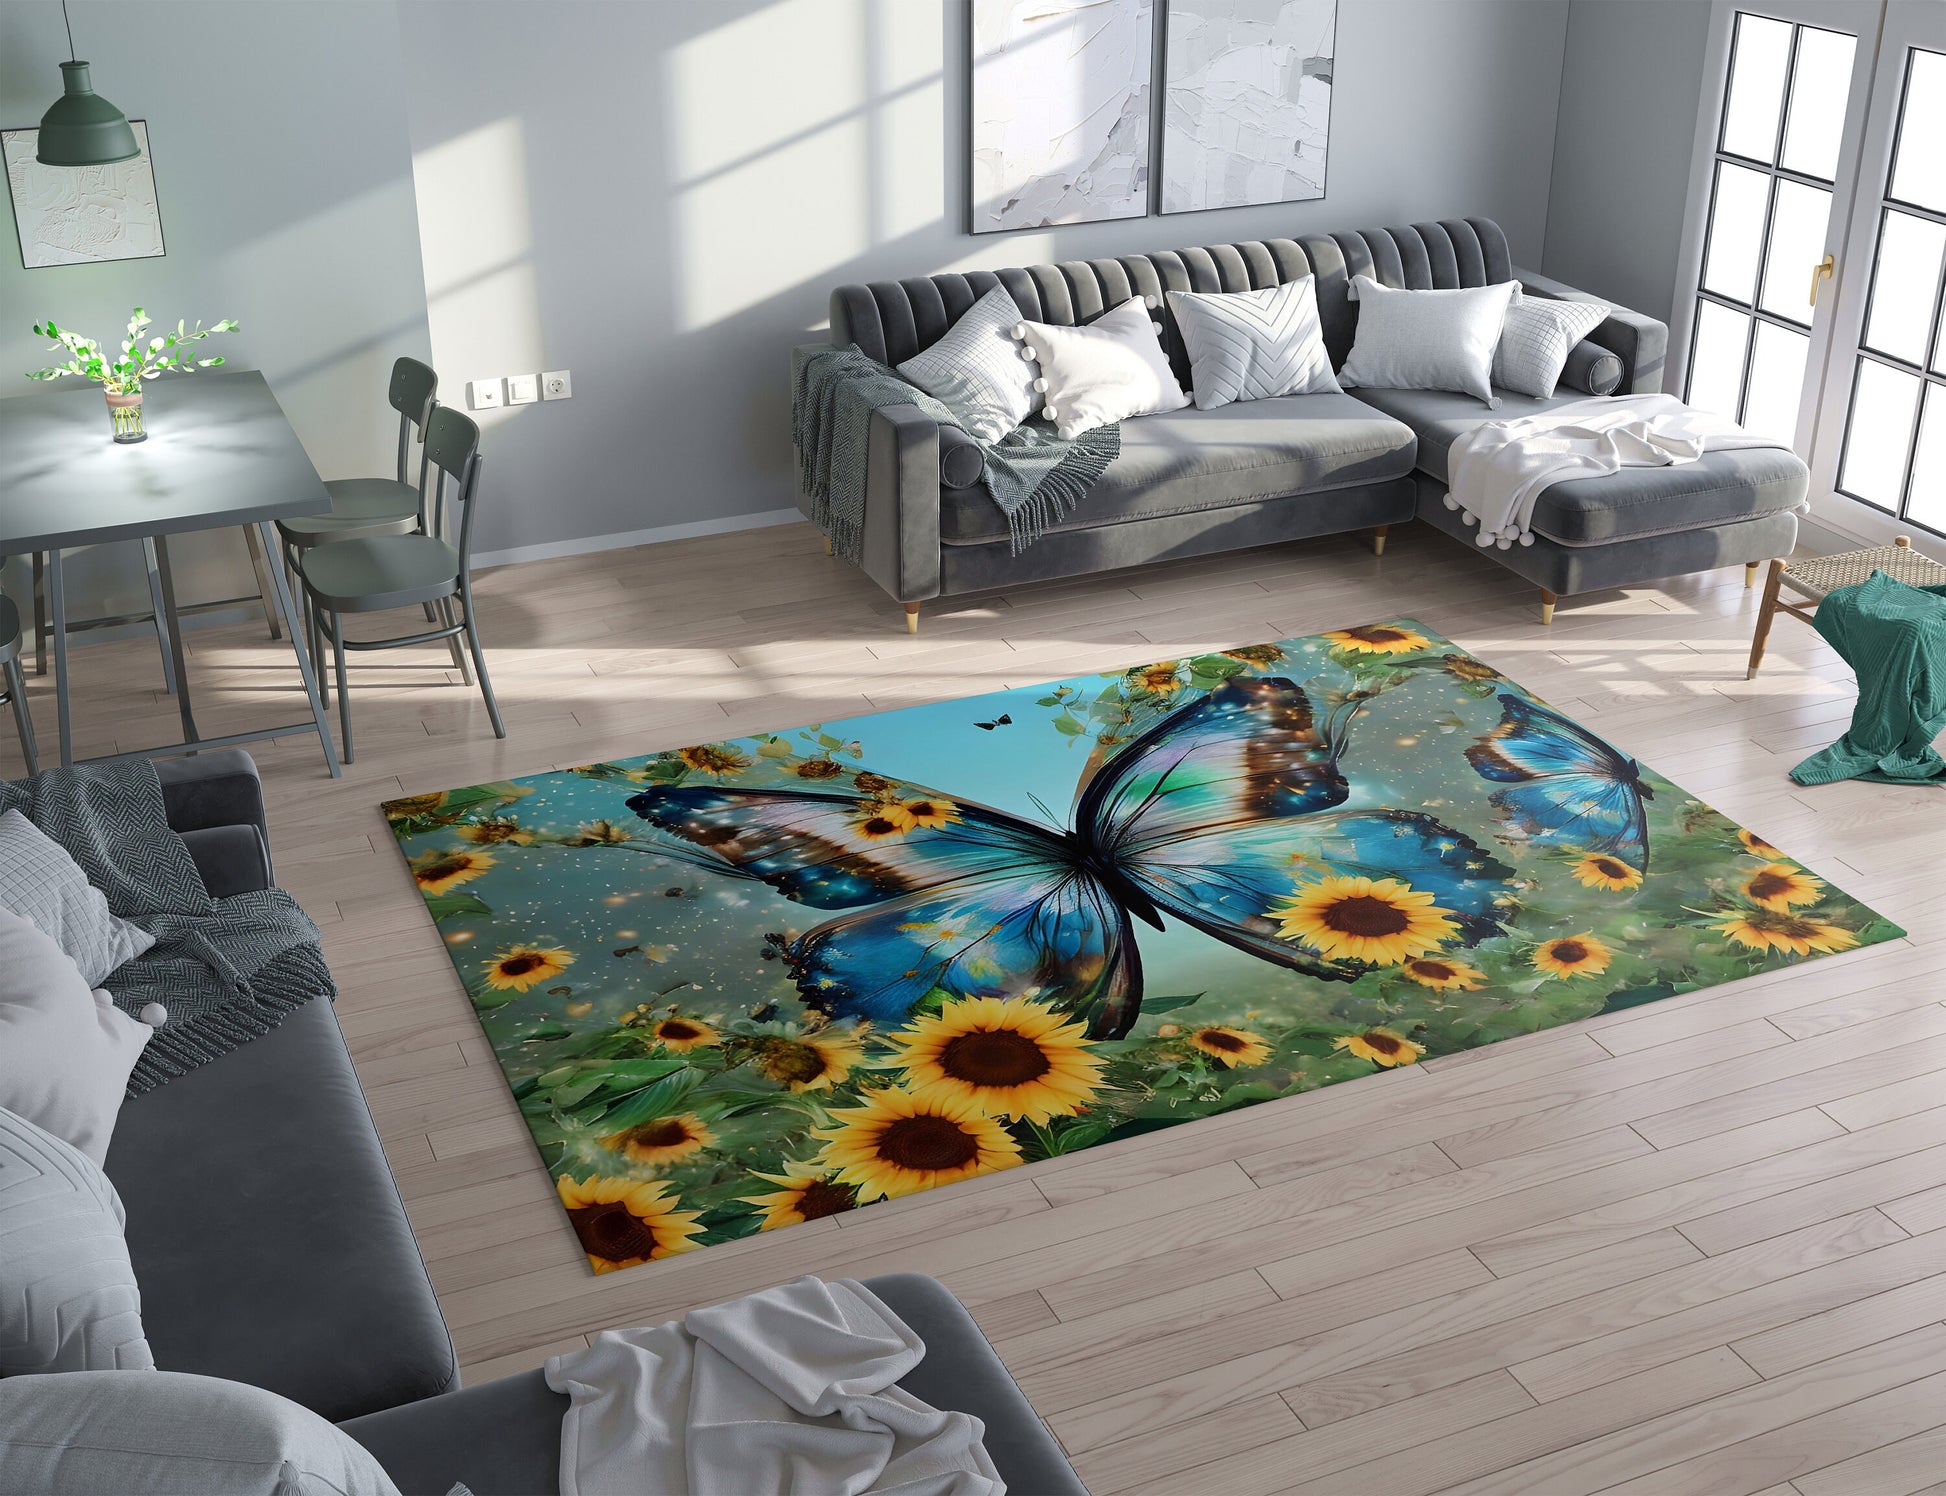 Butterfly Rug sunflowers Rug Blue Rug butterflies Floor Rugs 3'x5' 4'x6' 5'x7' Large rugs blue yellow